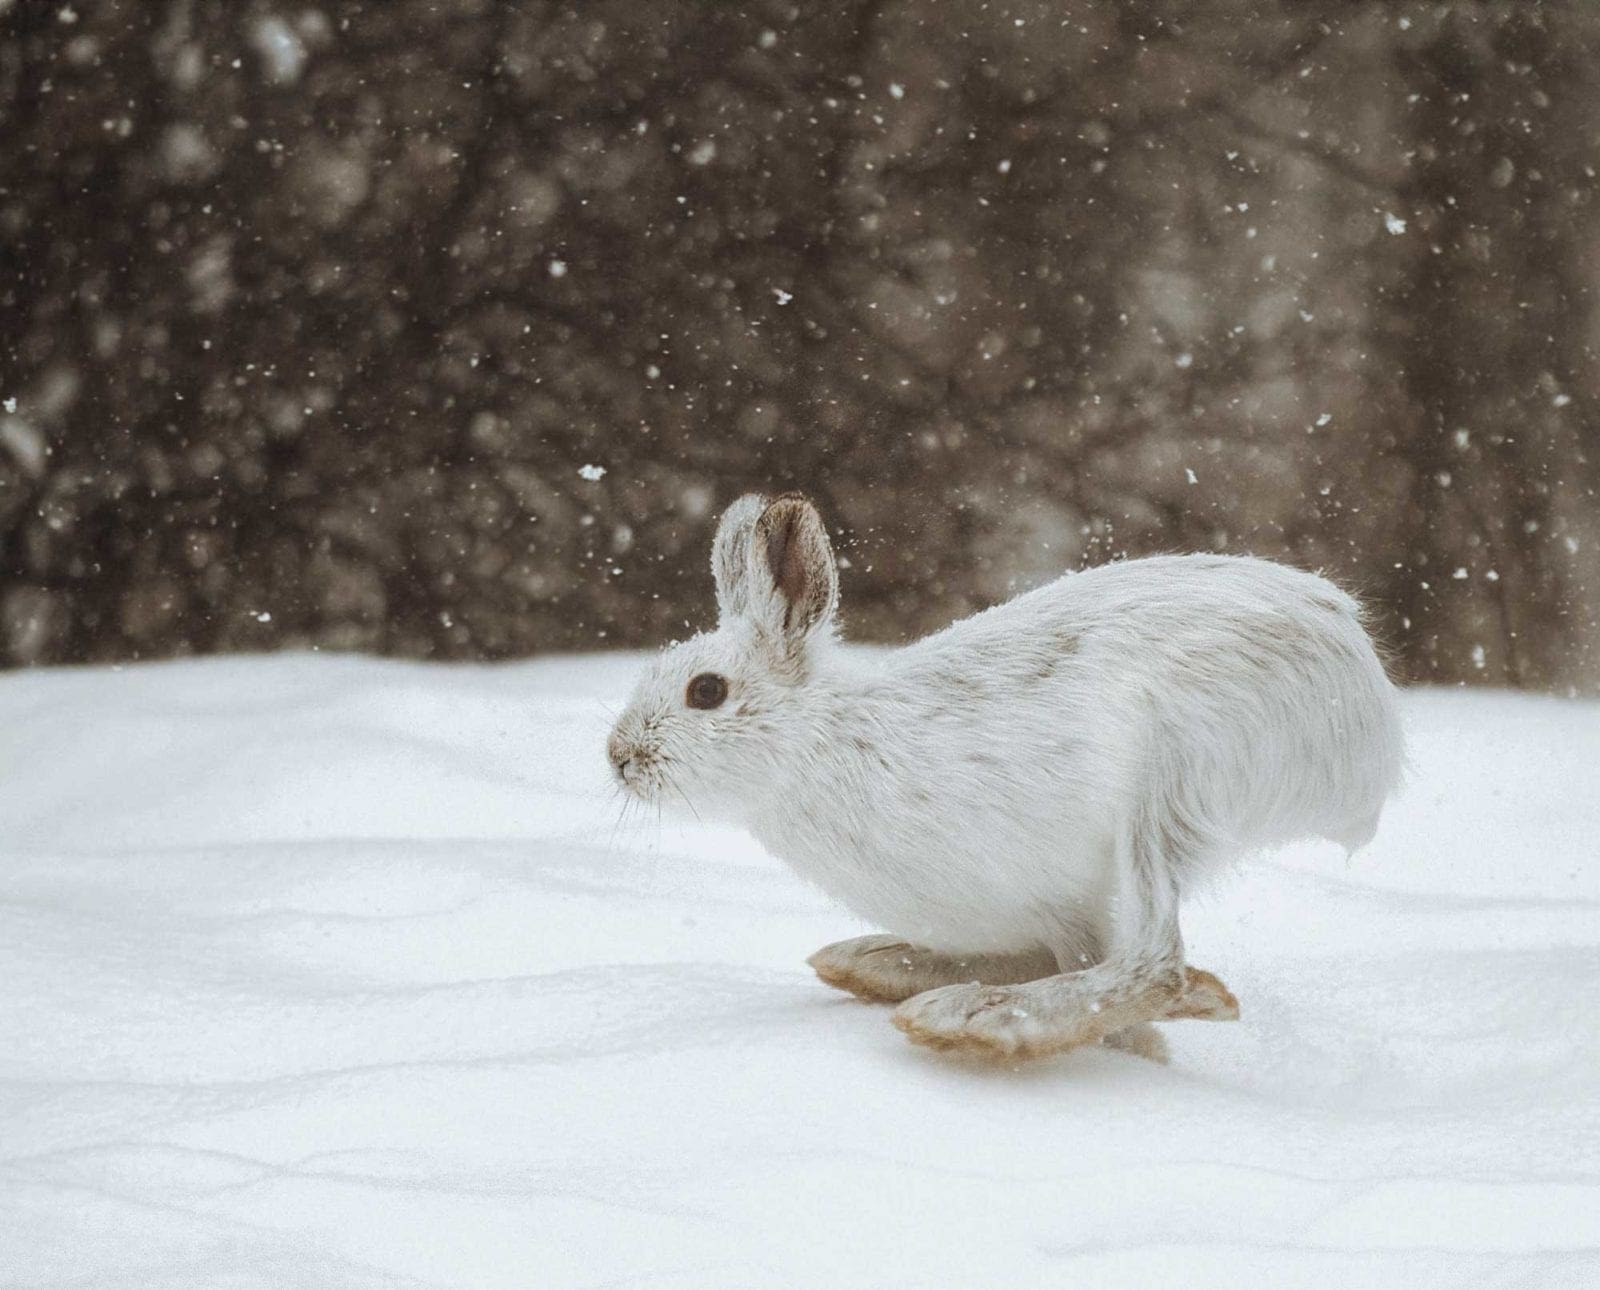 A snowshoe hare running from beagles